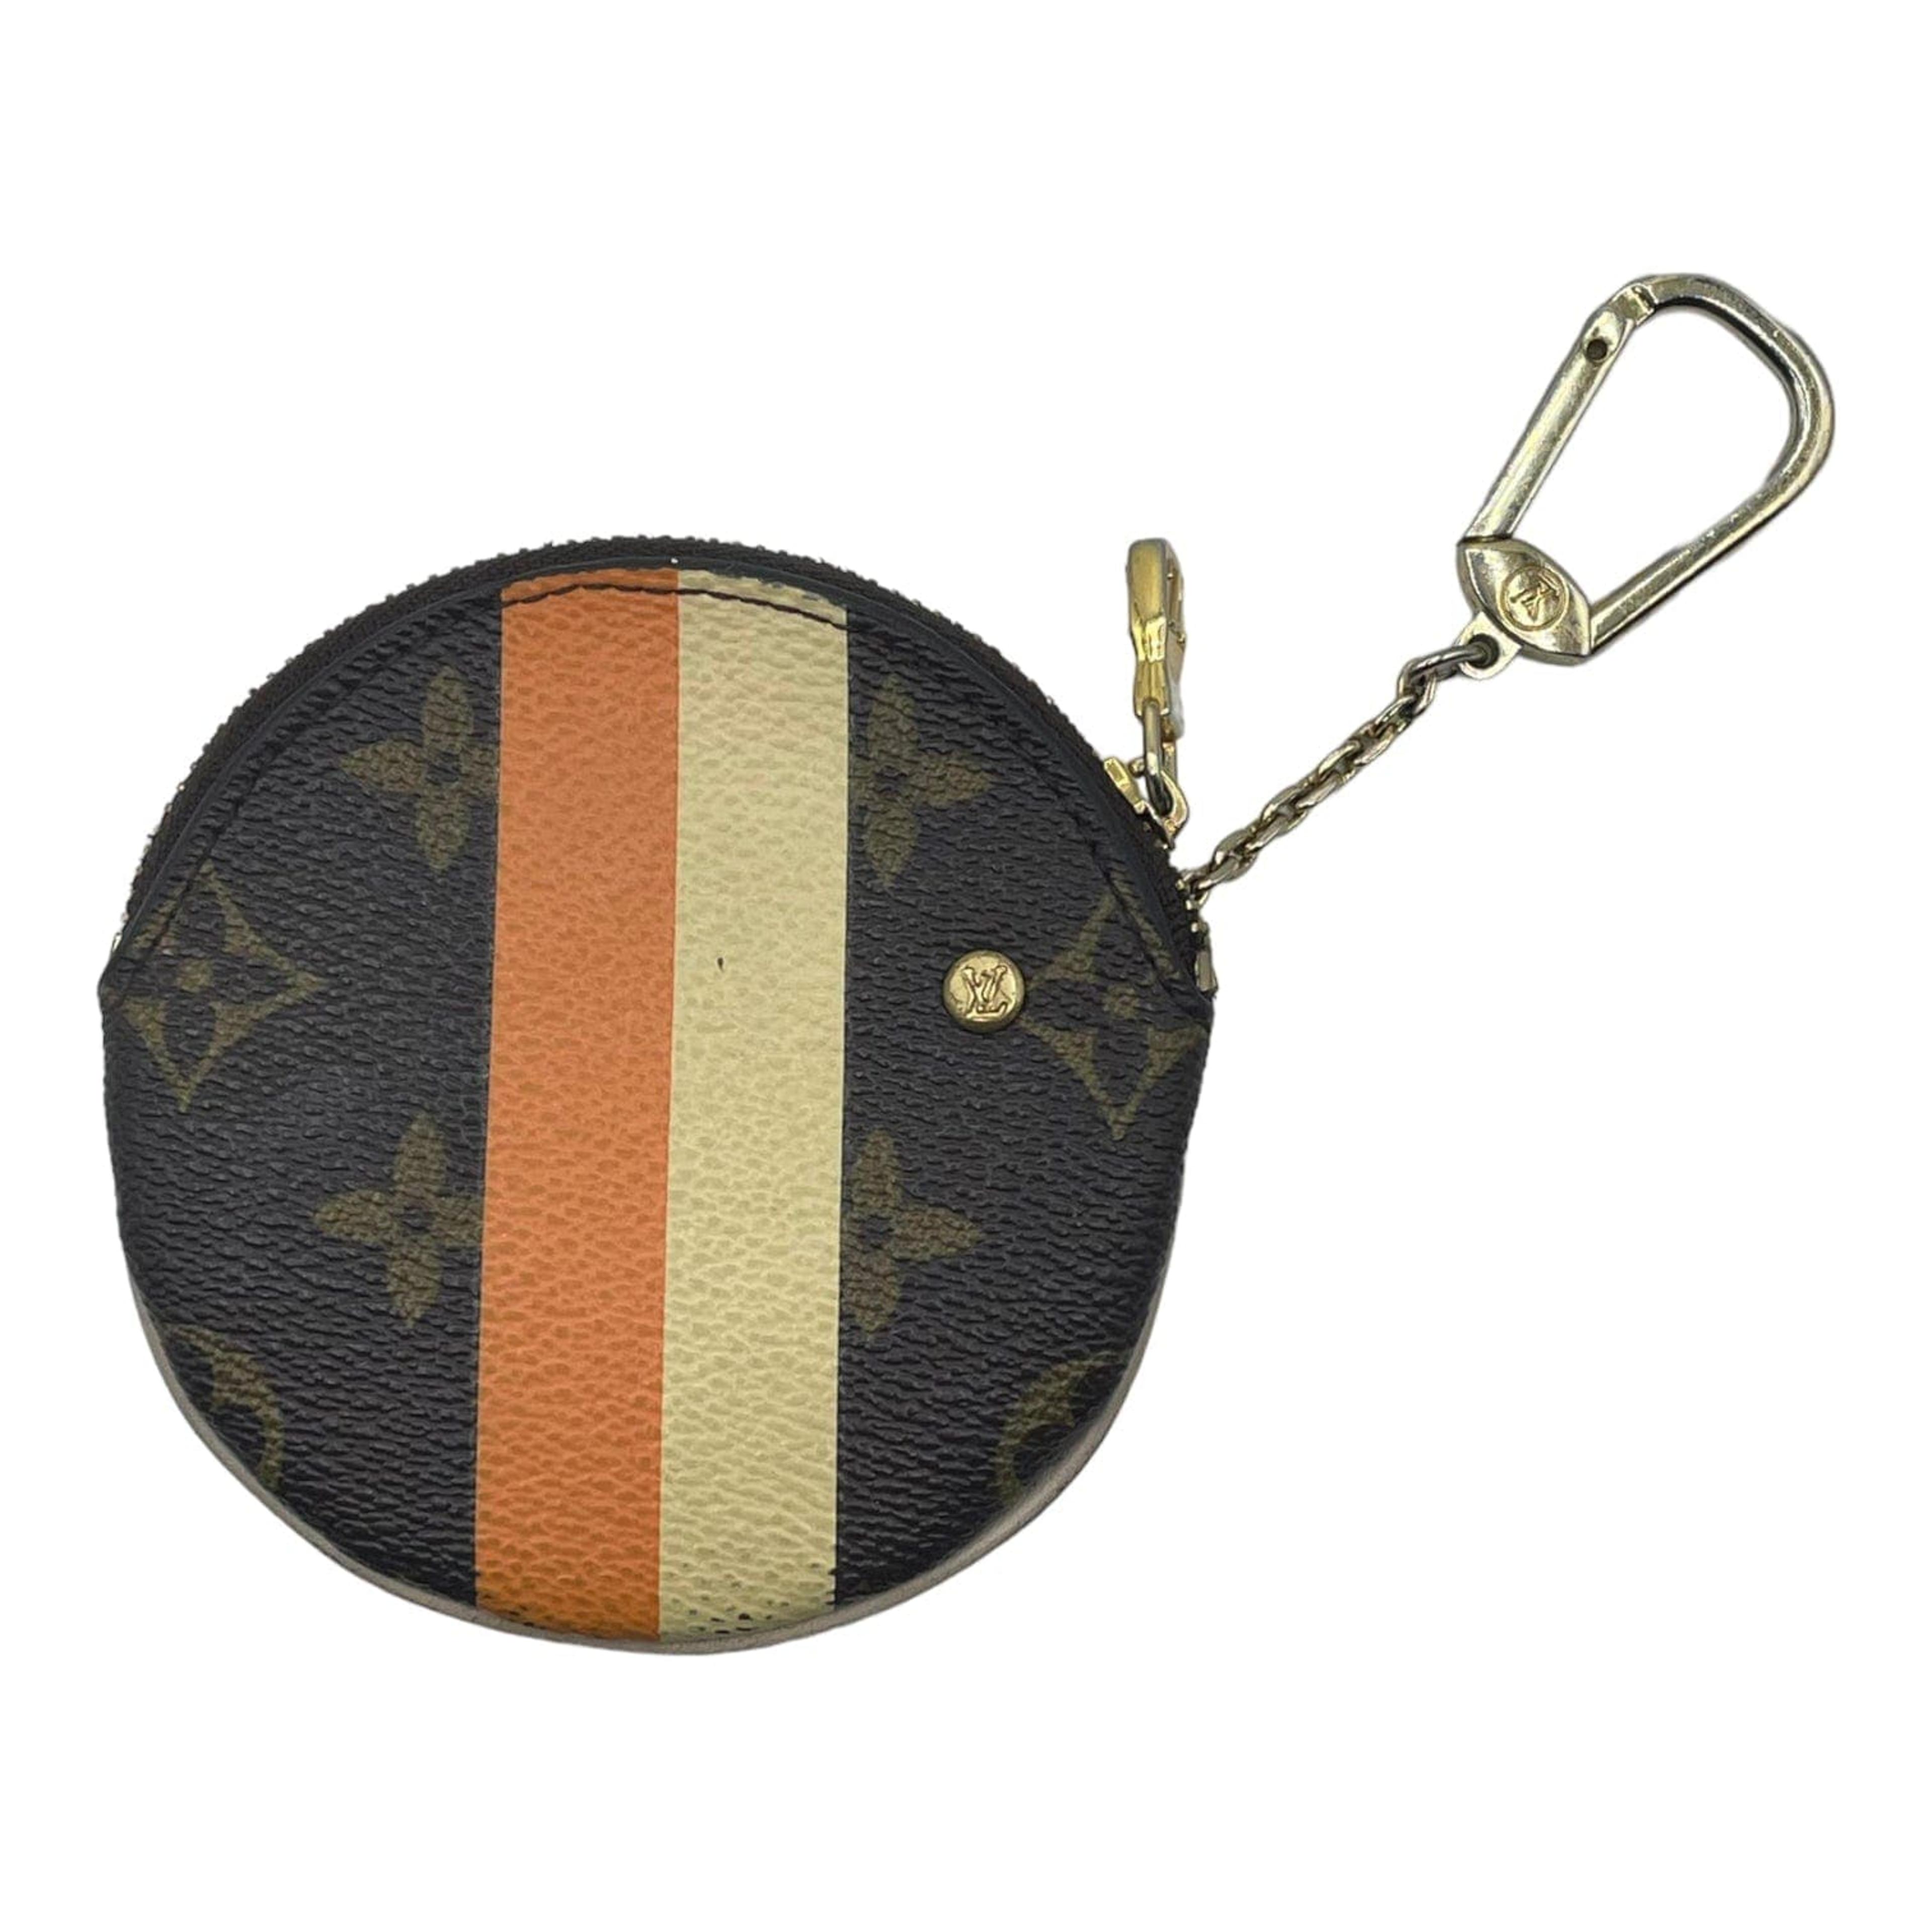 Alternate View 1 of Louis Vuitton Porte Monnaie Round Coin Pouch Pre-Owned